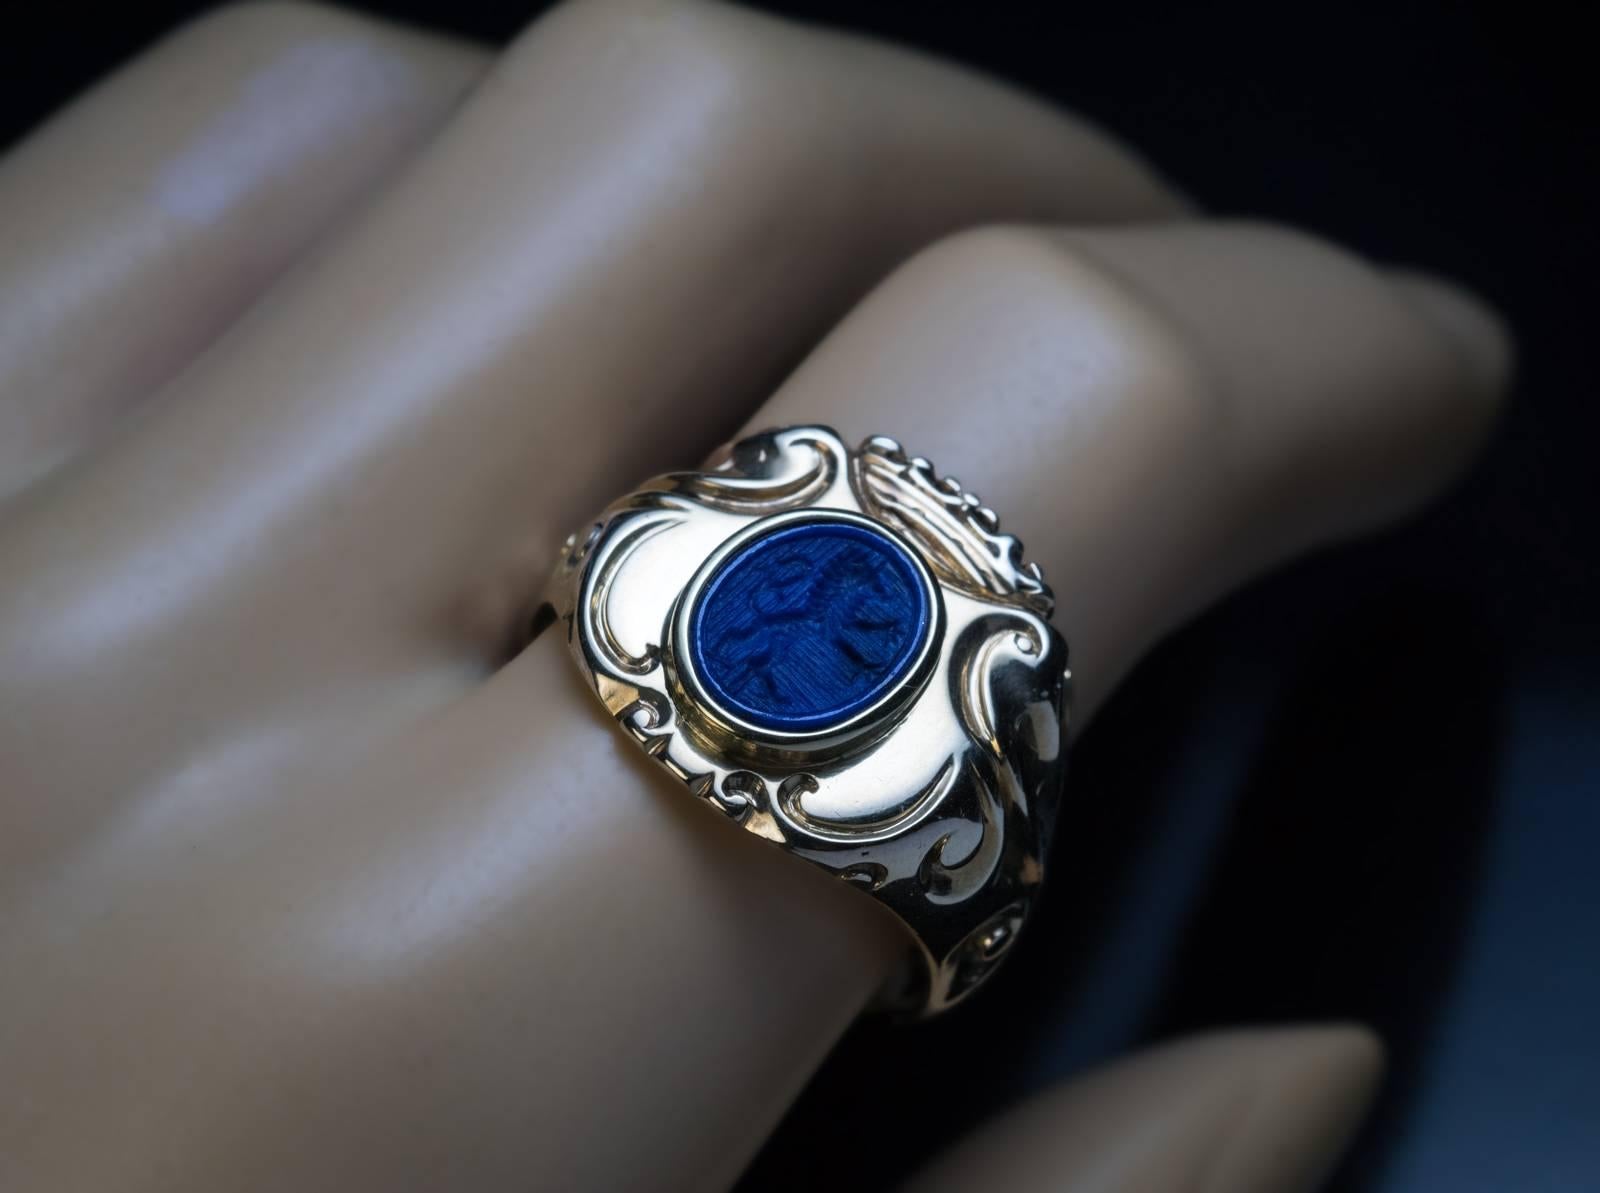 Austrian, c.1870
This one-of-a-kind antique 14K gold armorial signet ring is designed as a crowned ornate shield centered with a lapis lazuli intaglio crest carved with a walking lion. The shoulders of the ring are embellished with scrolling designs